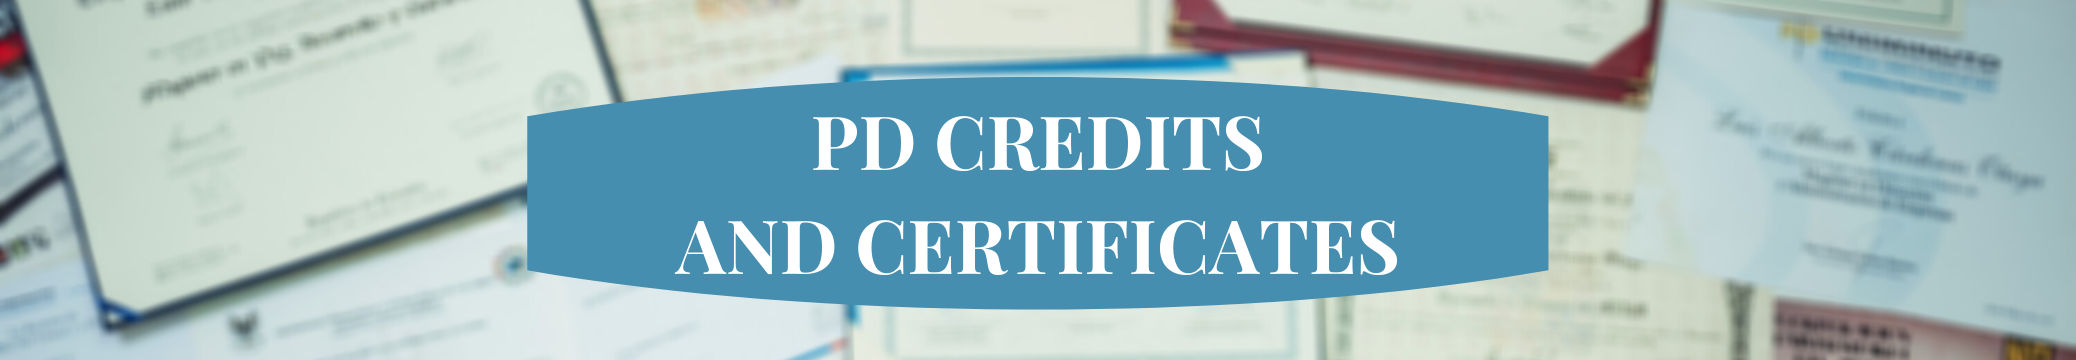 PD Credits and Certificates